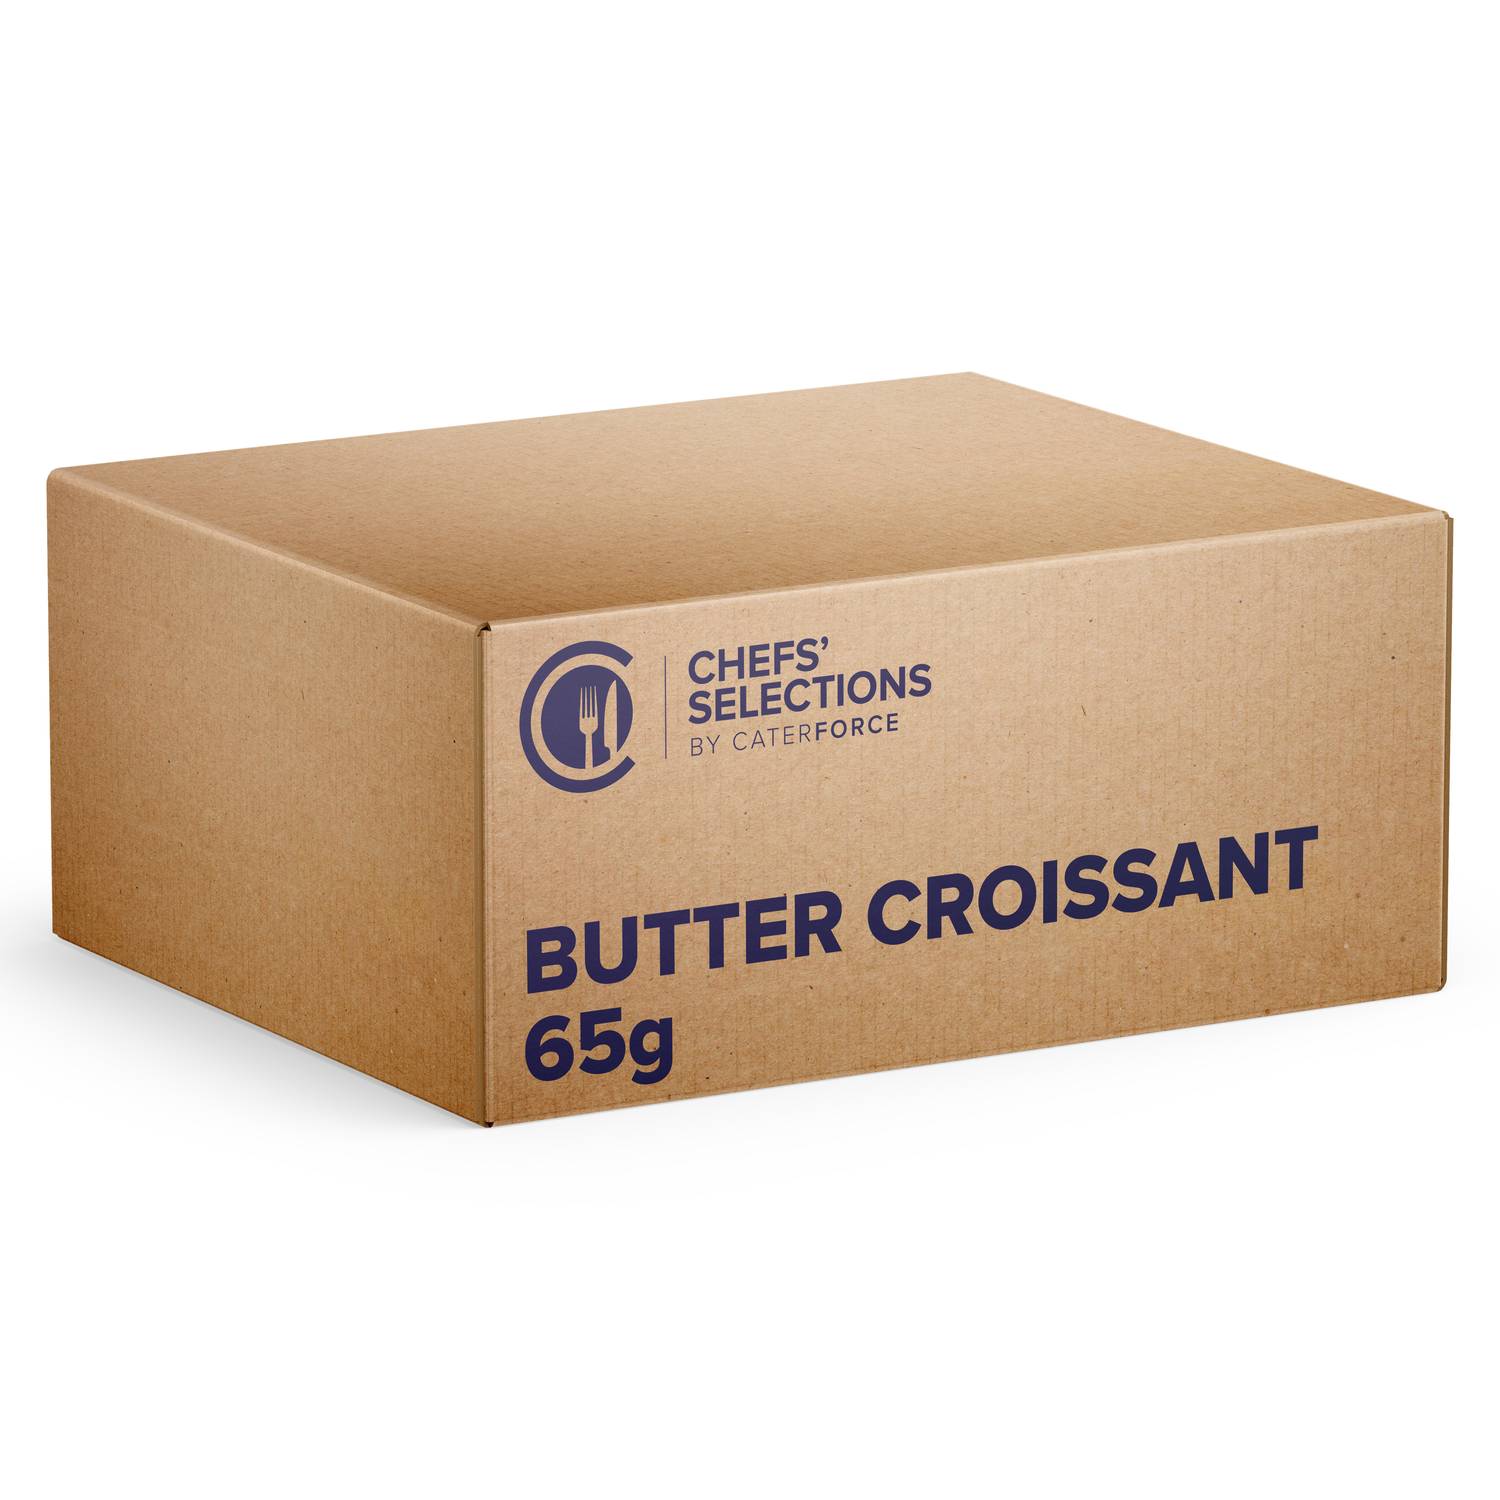 Chefs’ Selections Butter Croissant (60 x 65g)